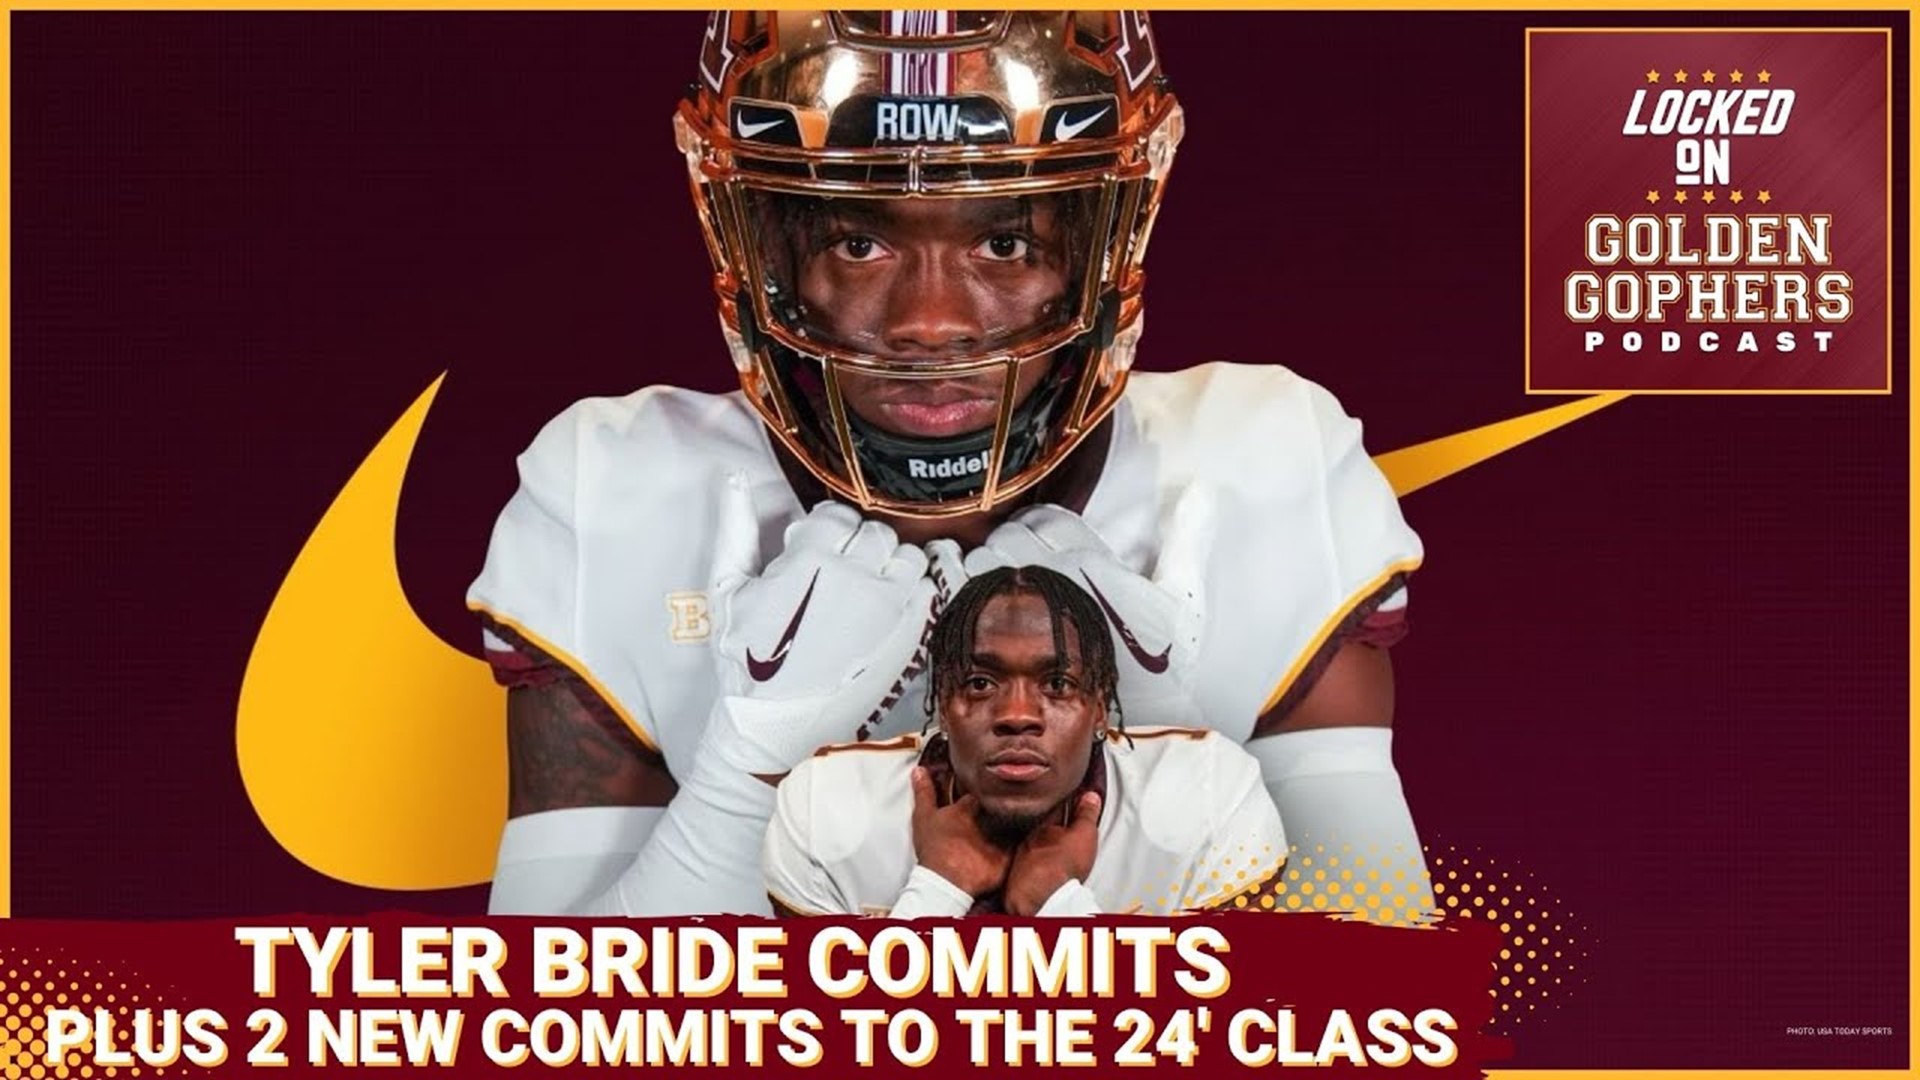 On todays show we discuss the Gophers new addition from the transfer portal in Tyler Bride and what he can bring to this Minnesota Gophers defense.